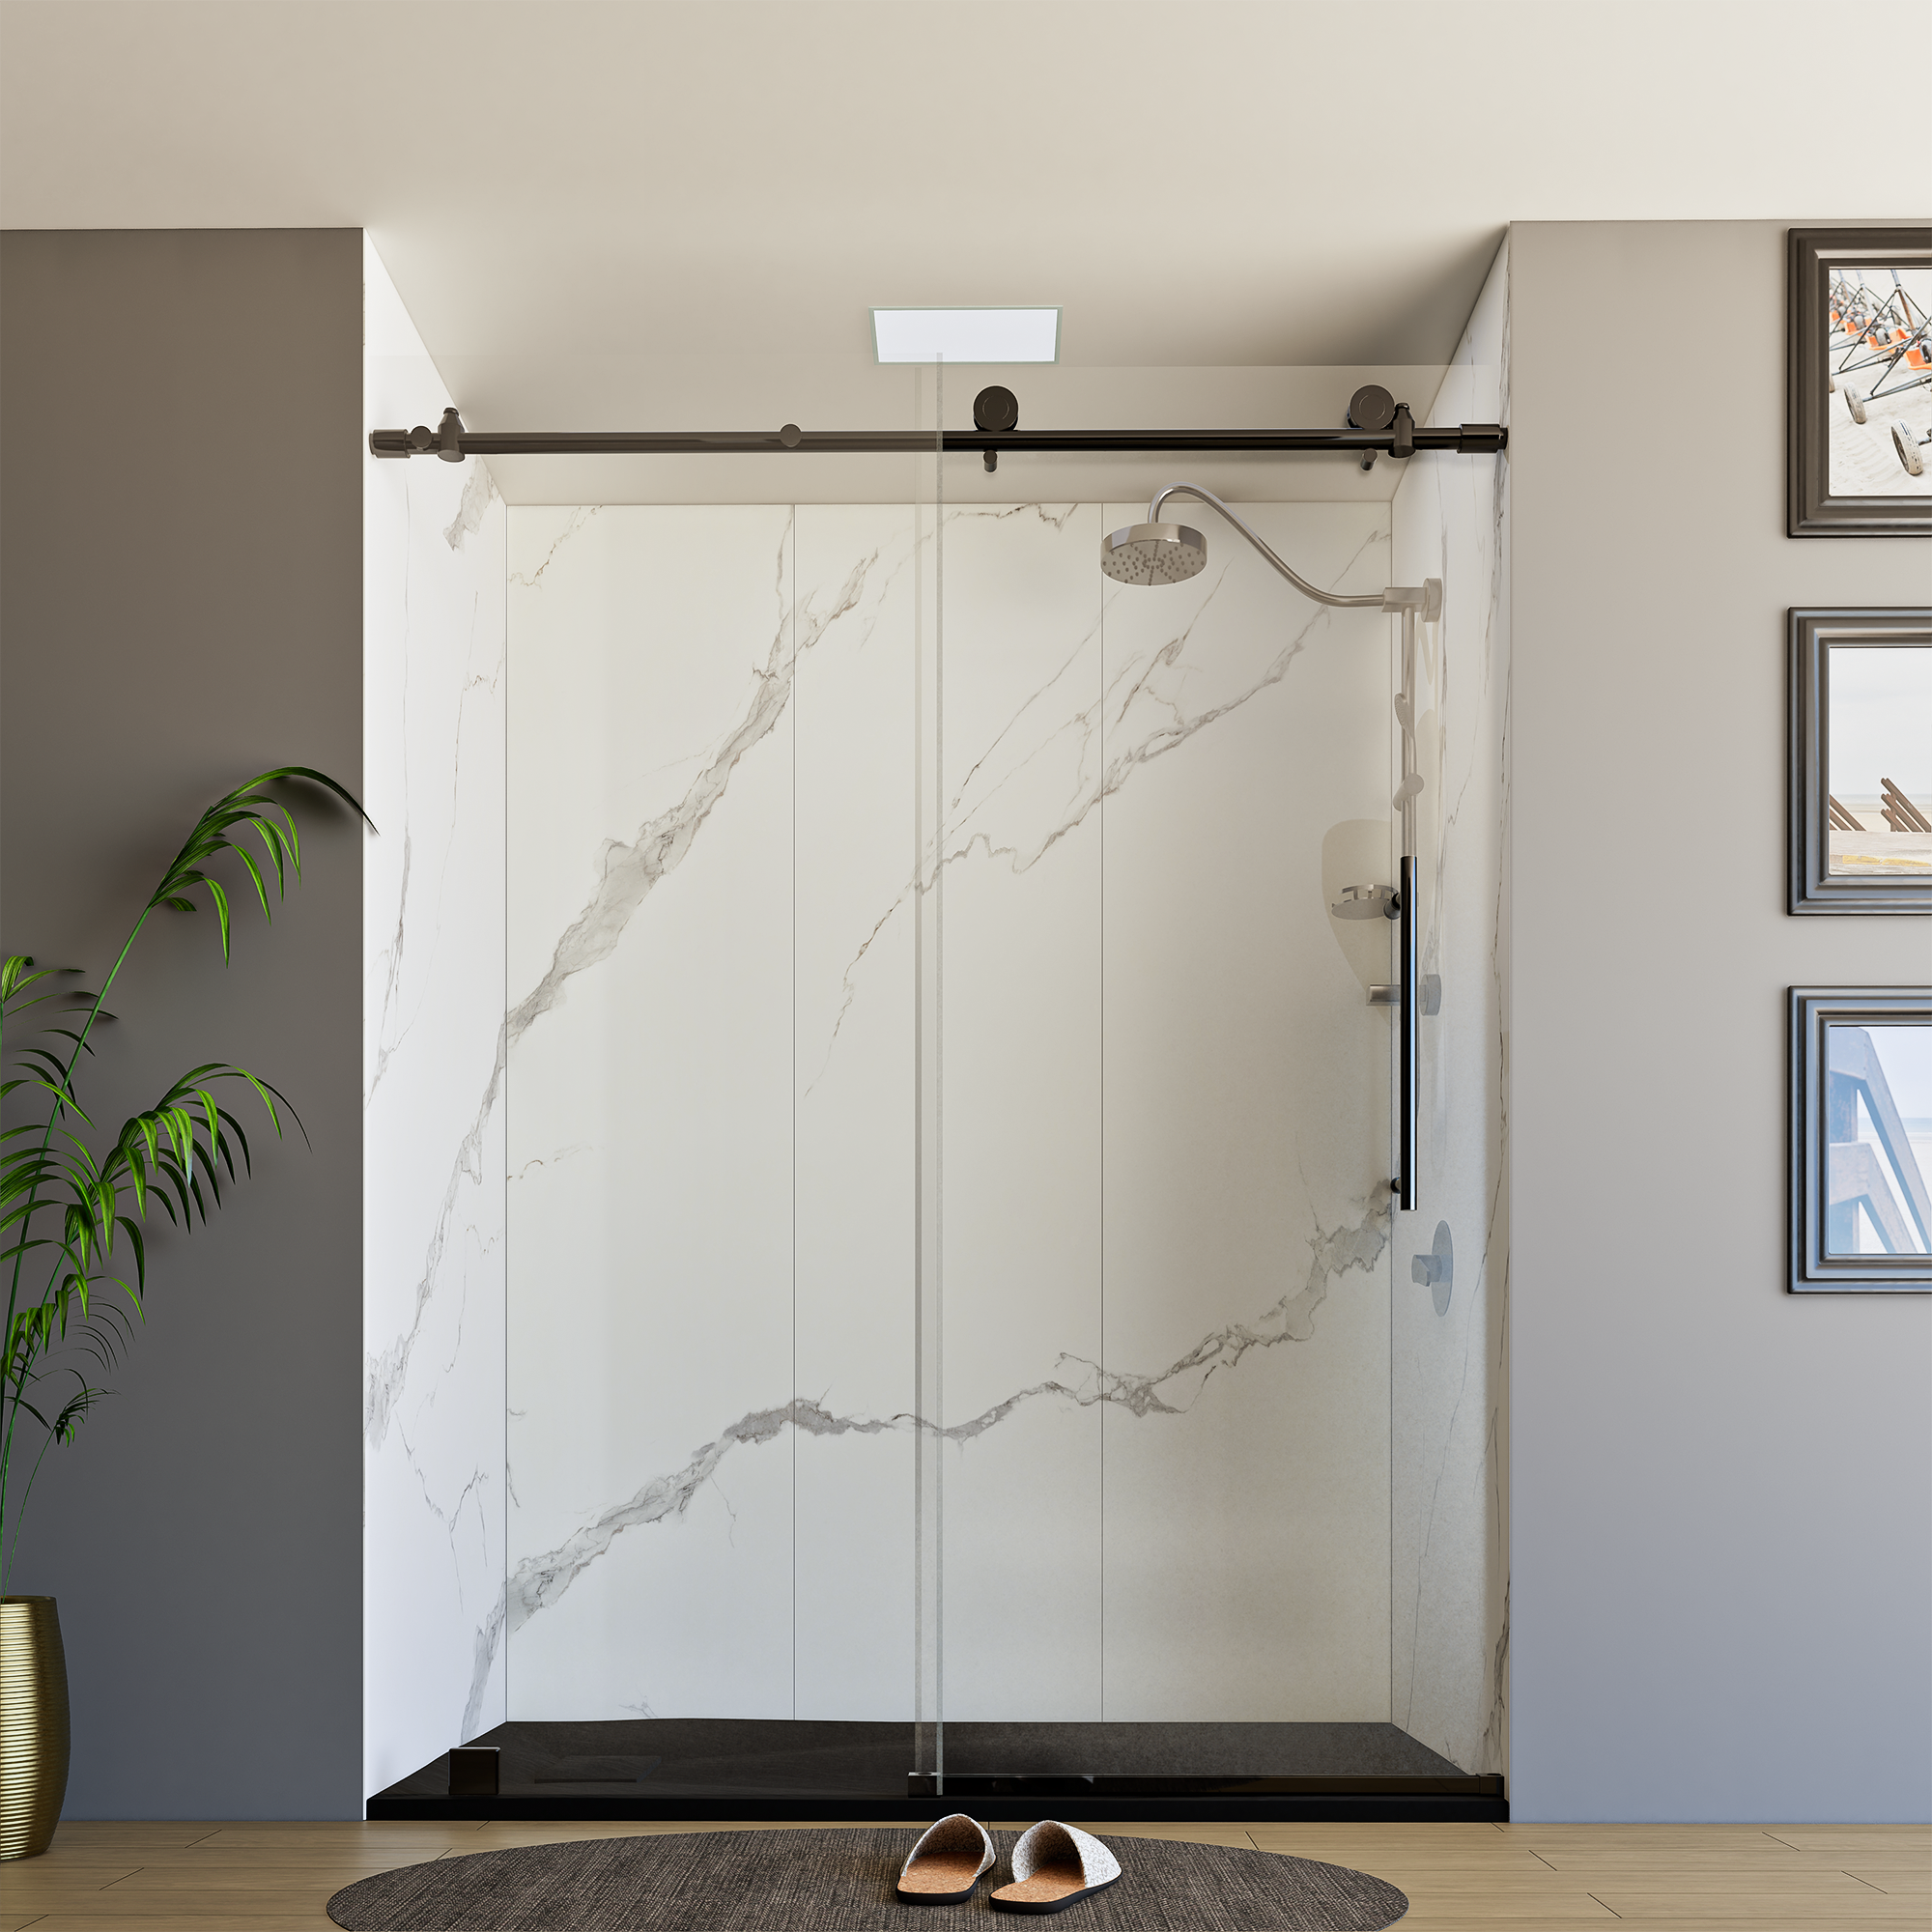 60" x 76" Frameless Shower Door with Black - Solid Surface Shower Base Tray - Shower Kit with covered drain - and 5pc Shower Wall System